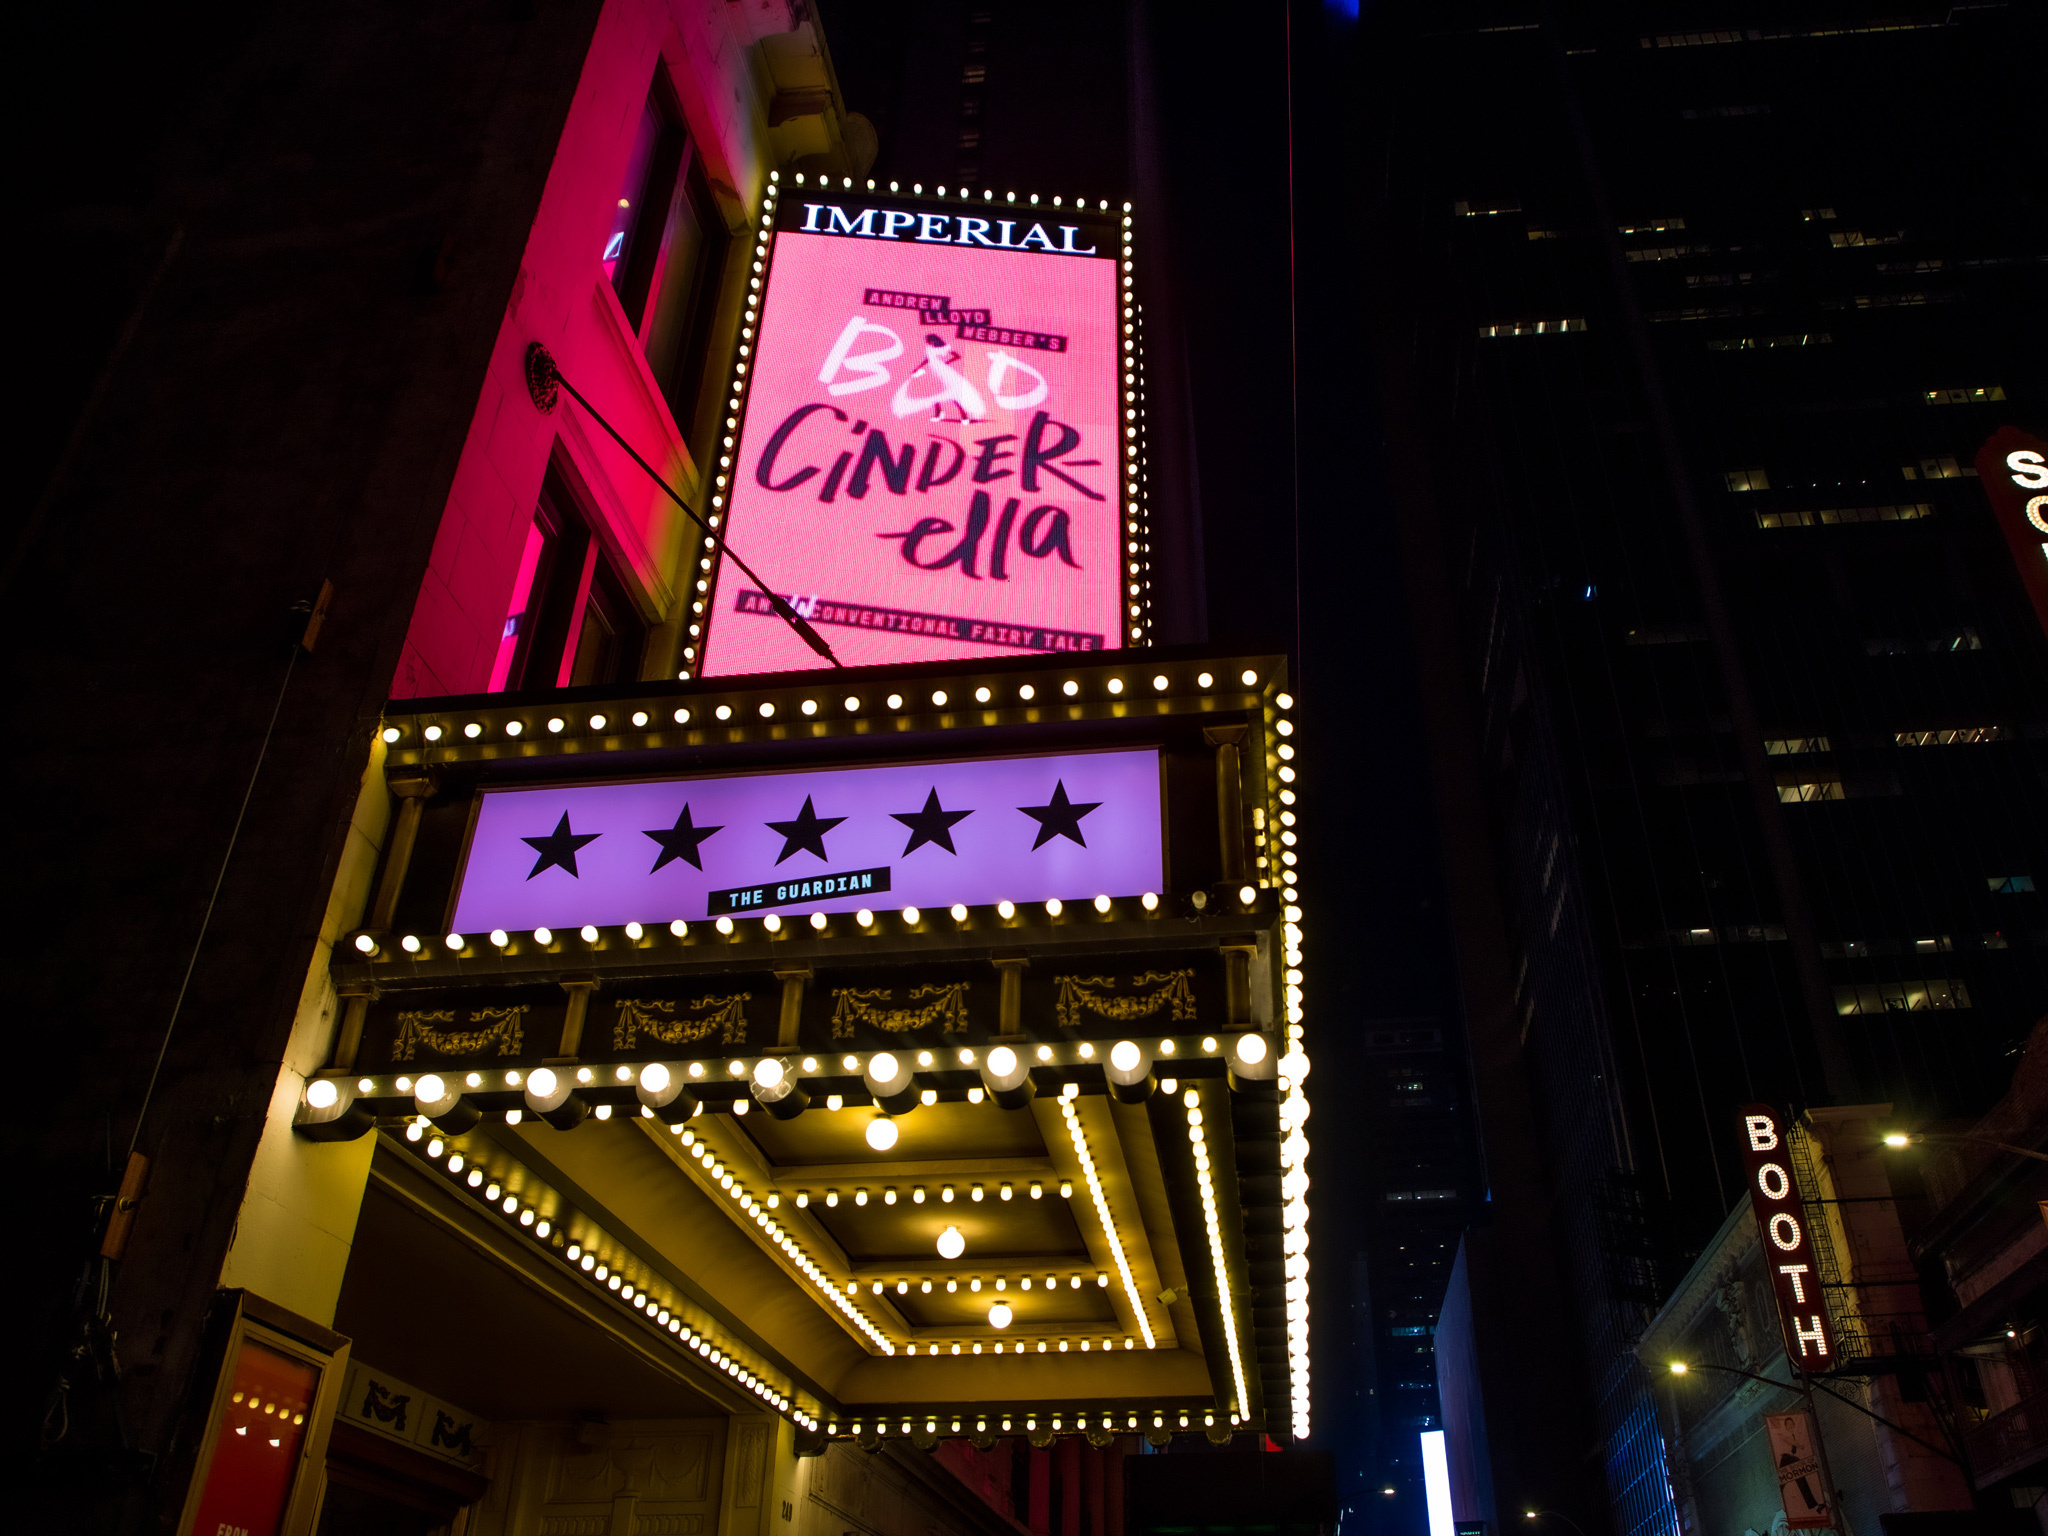 Andrew Lloyd Webber's Bad Cinderella at the Imperial Theatre on Broadway